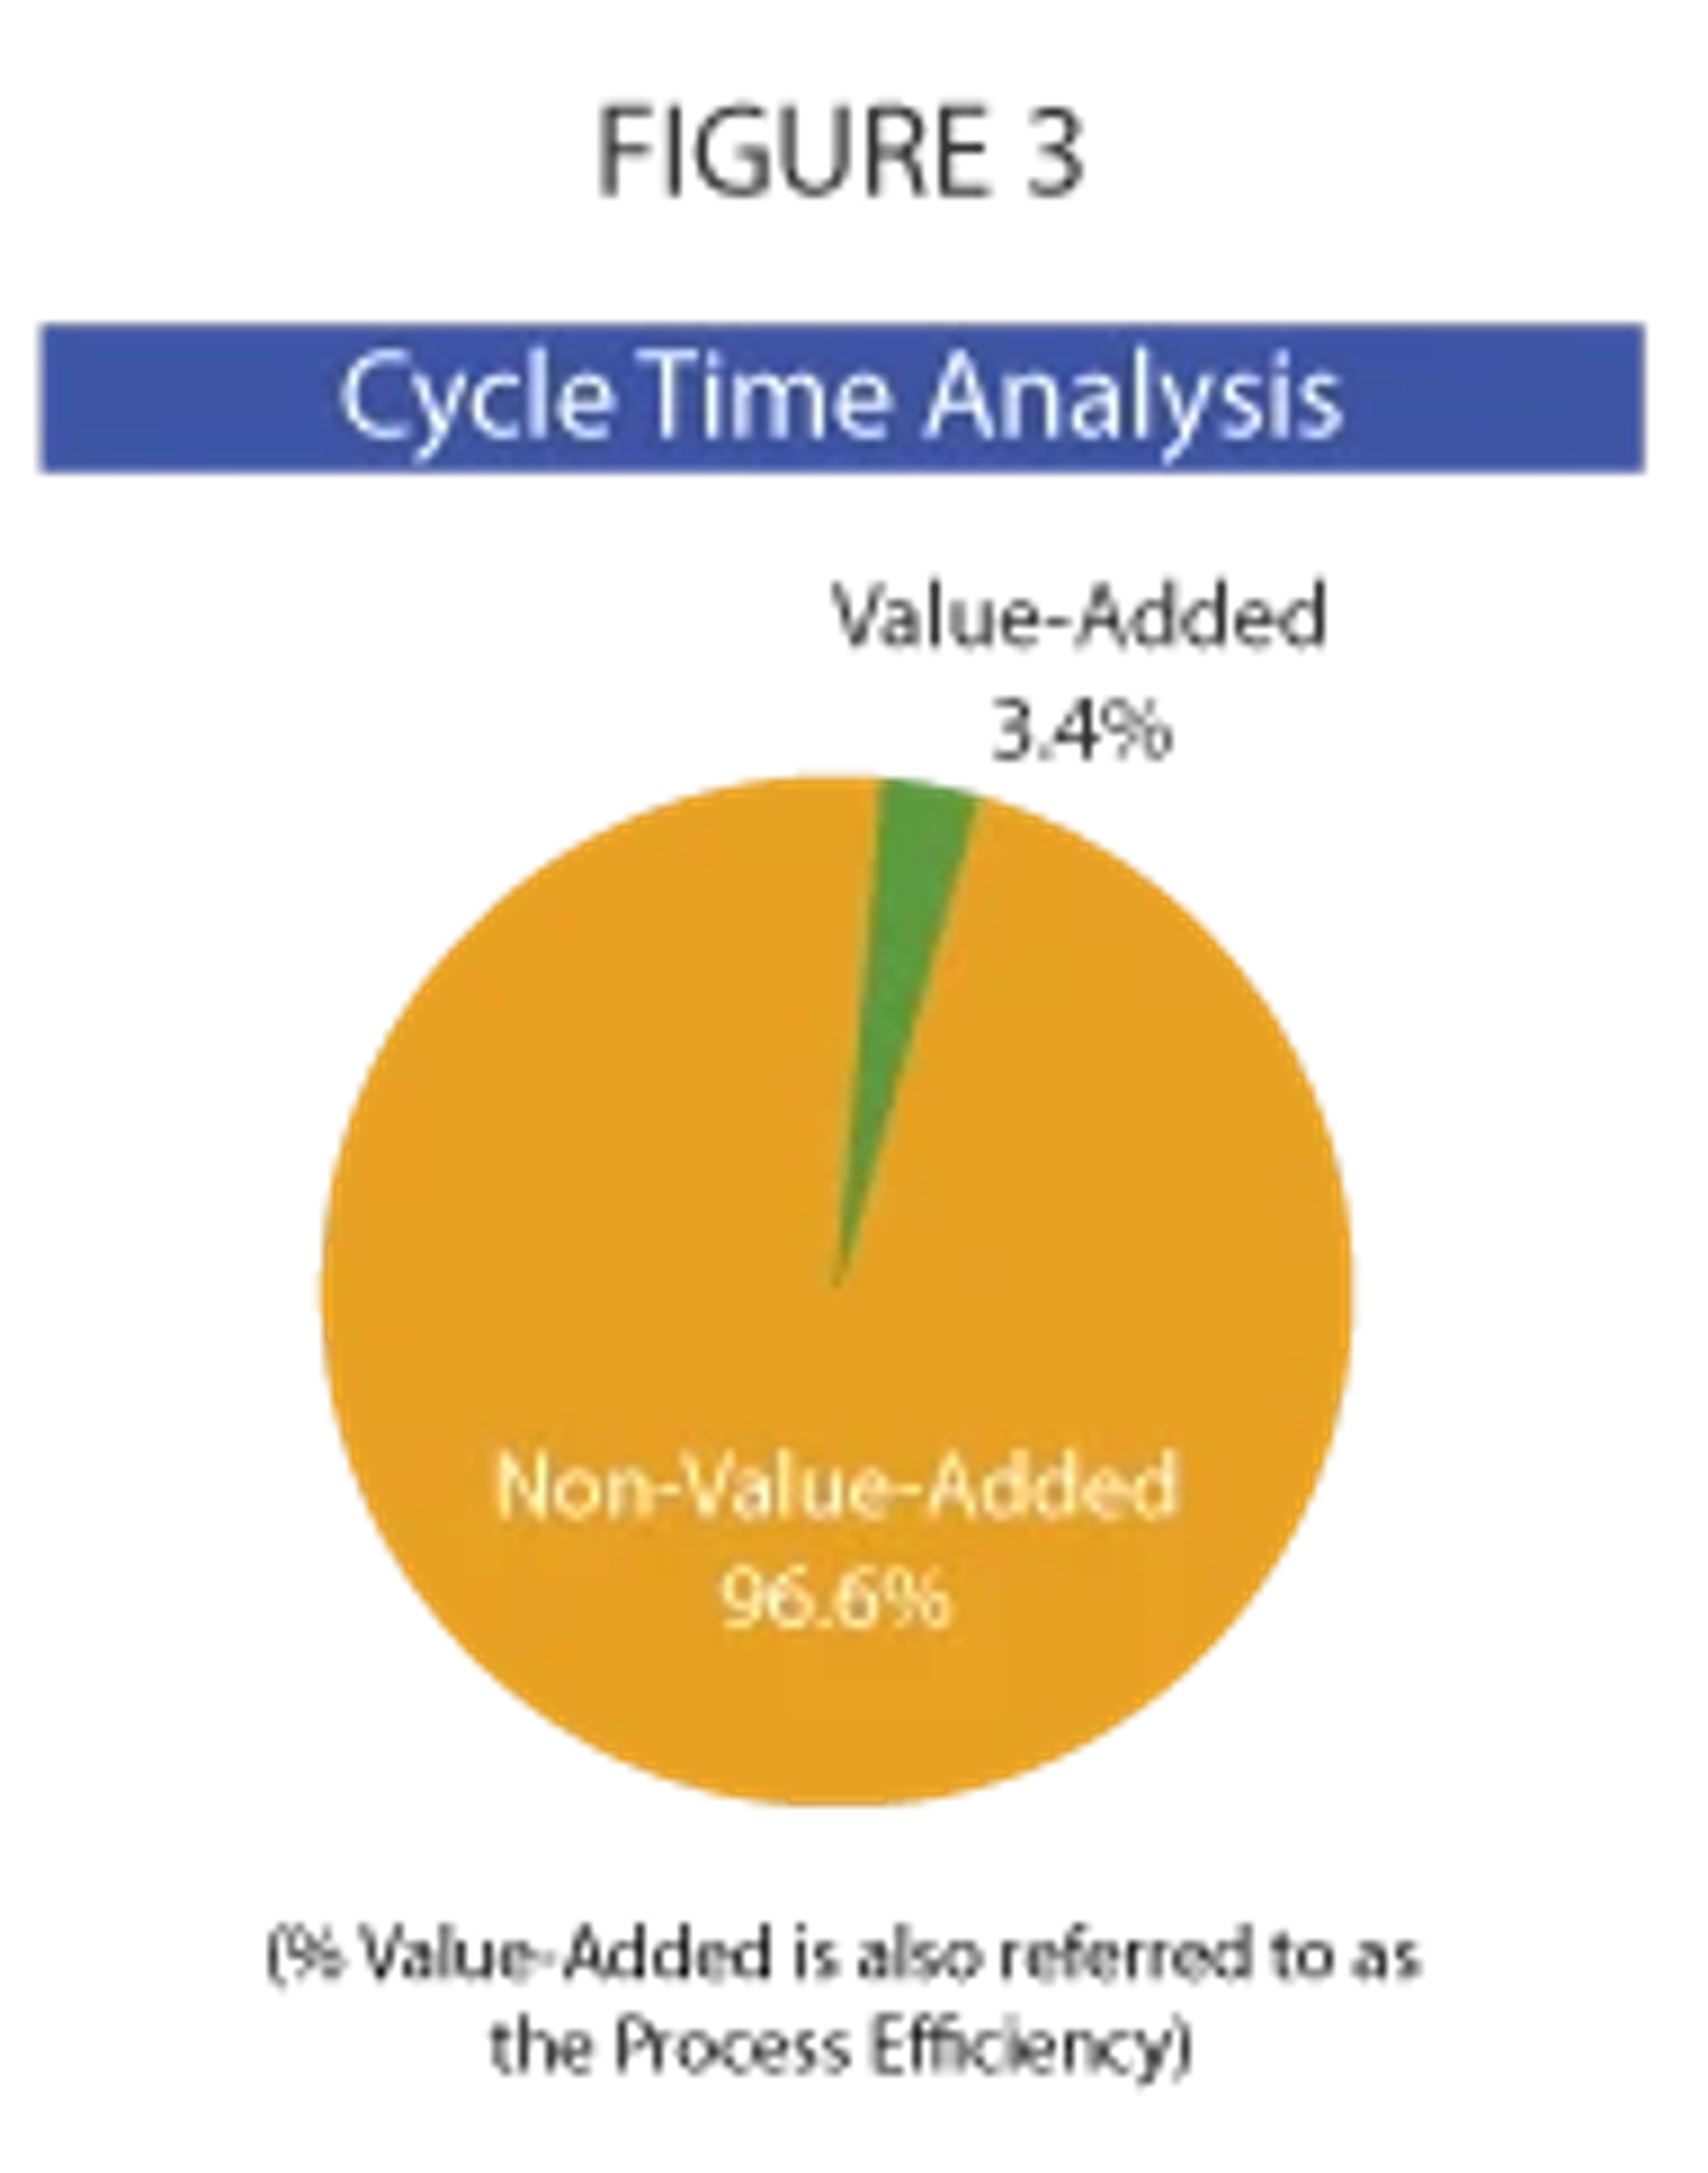 Example of a Pie Chart showing Cycle Time Analysis with components "Value-Added" and "Non-Value-Added"